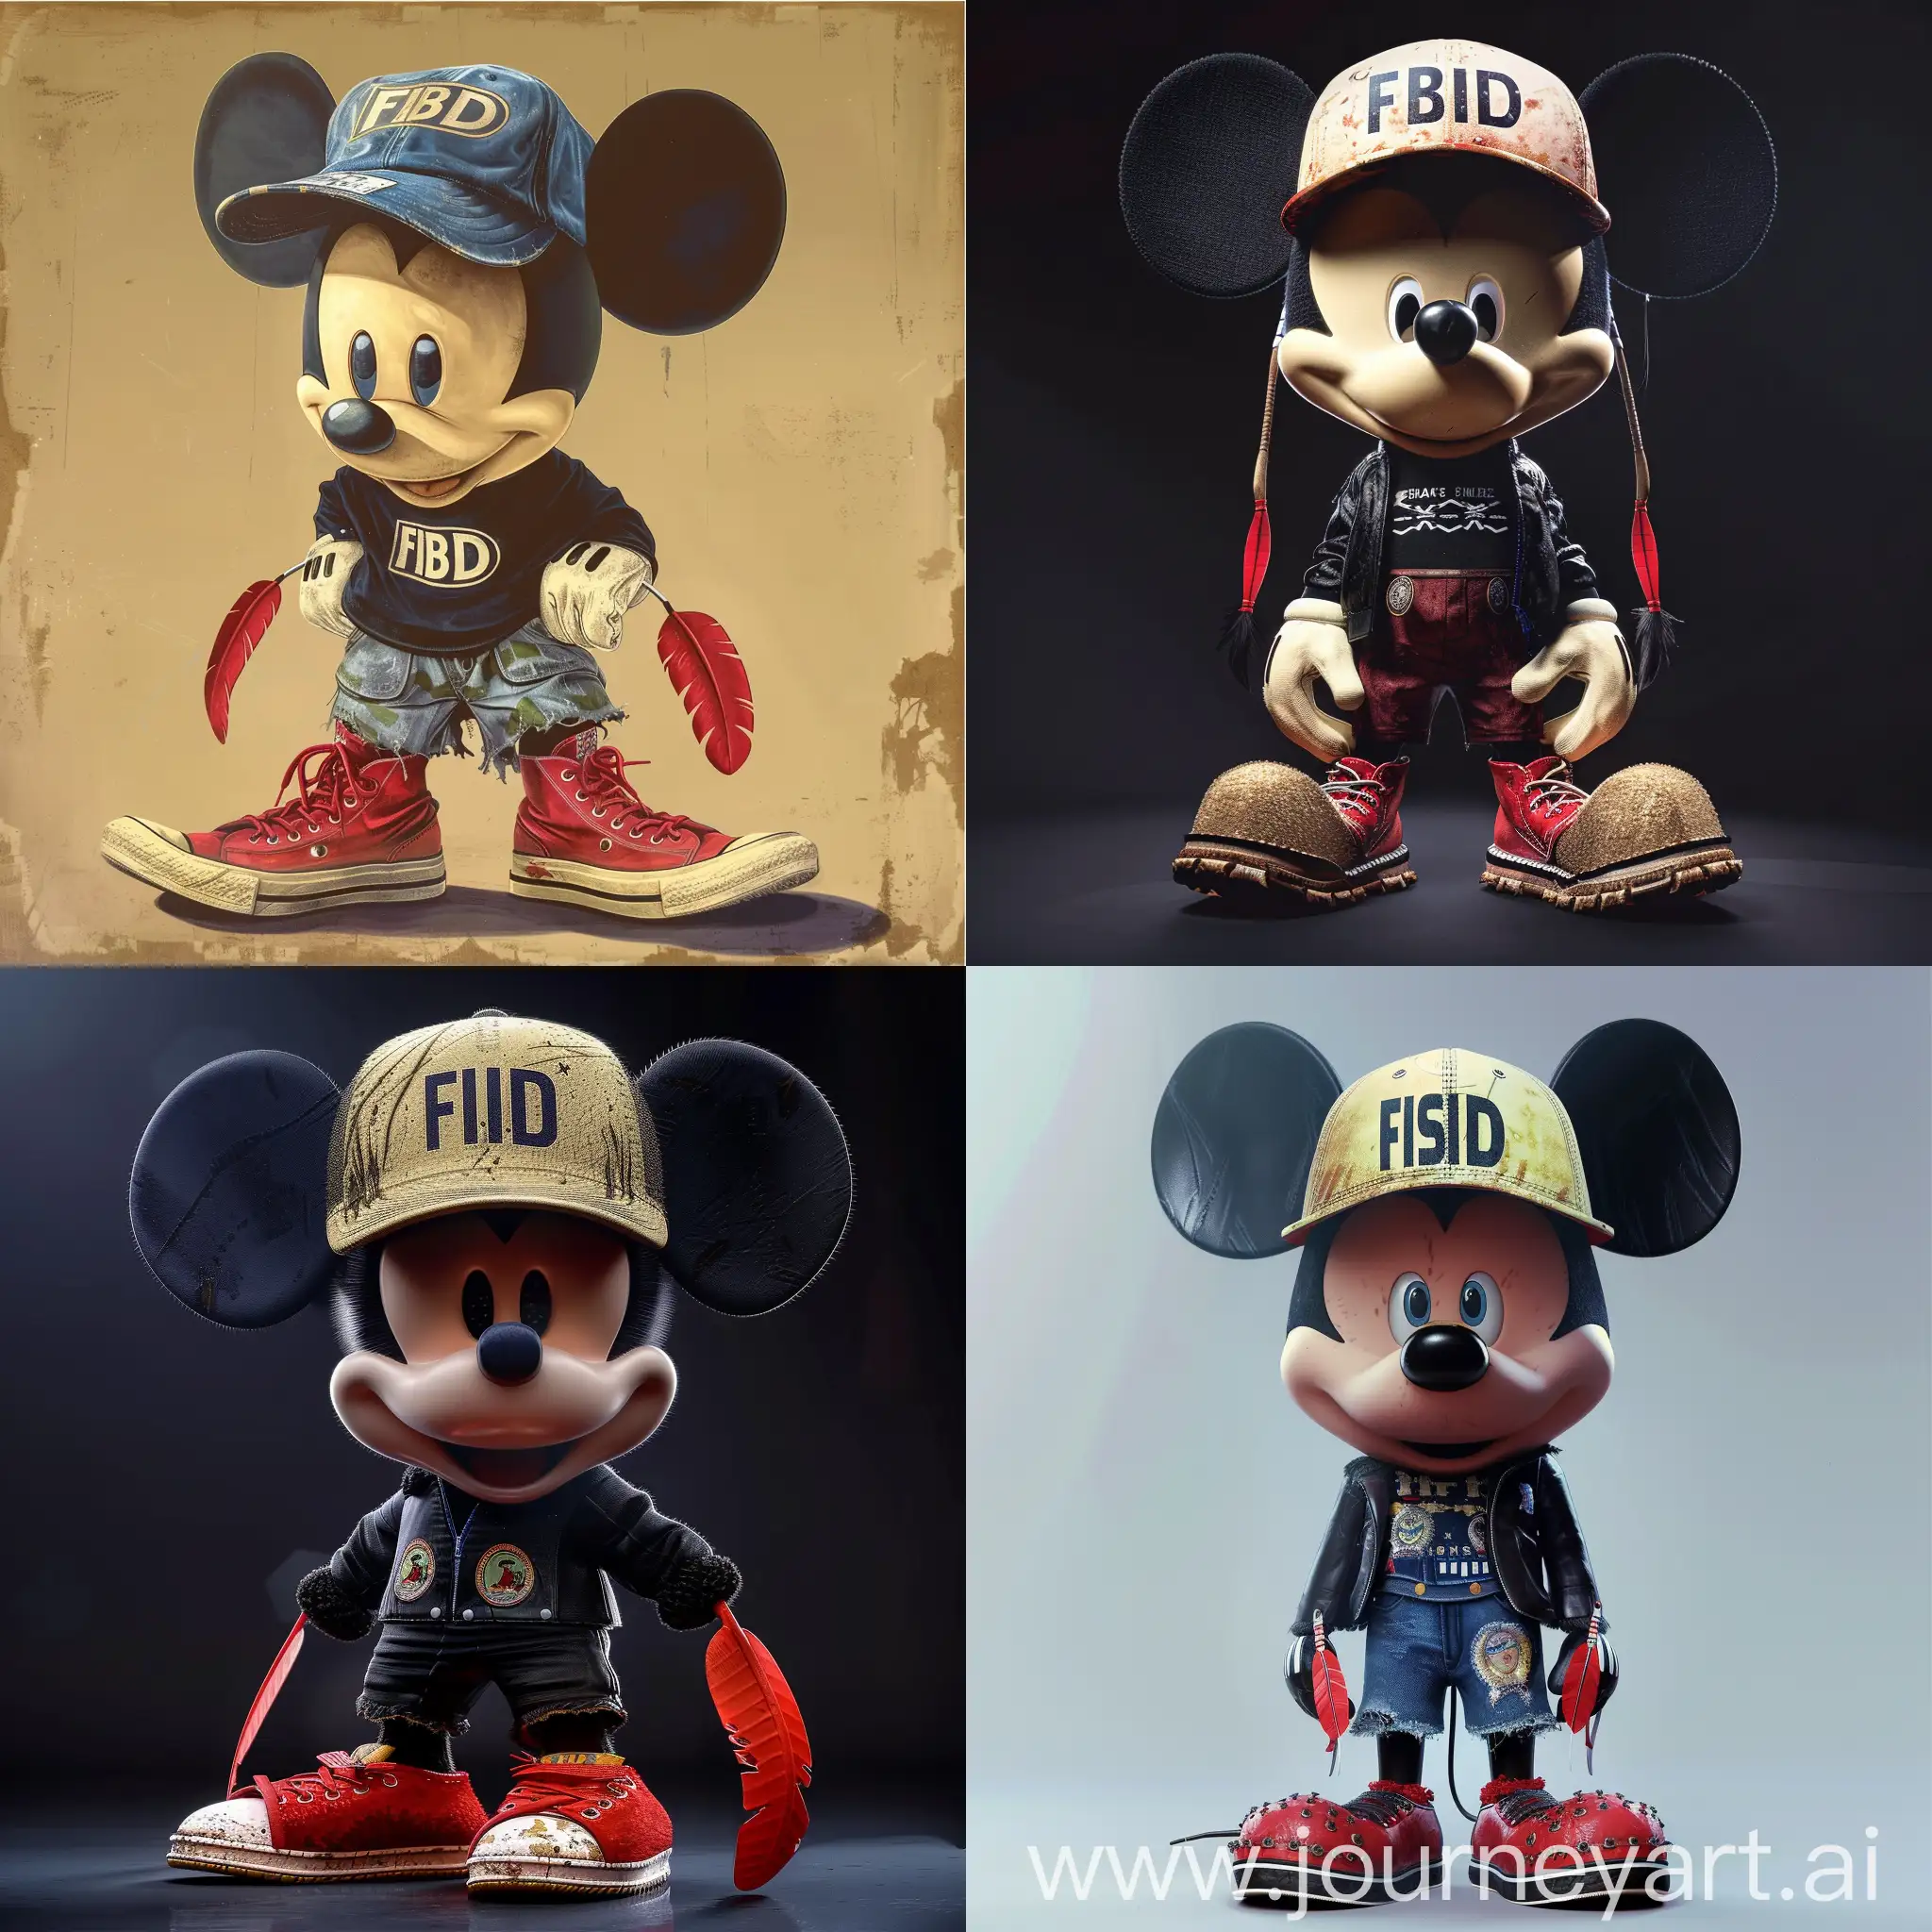 Mickey-Mouse-from-Dagestan-Wearing-FBI-Cap-and-Red-Moccasins